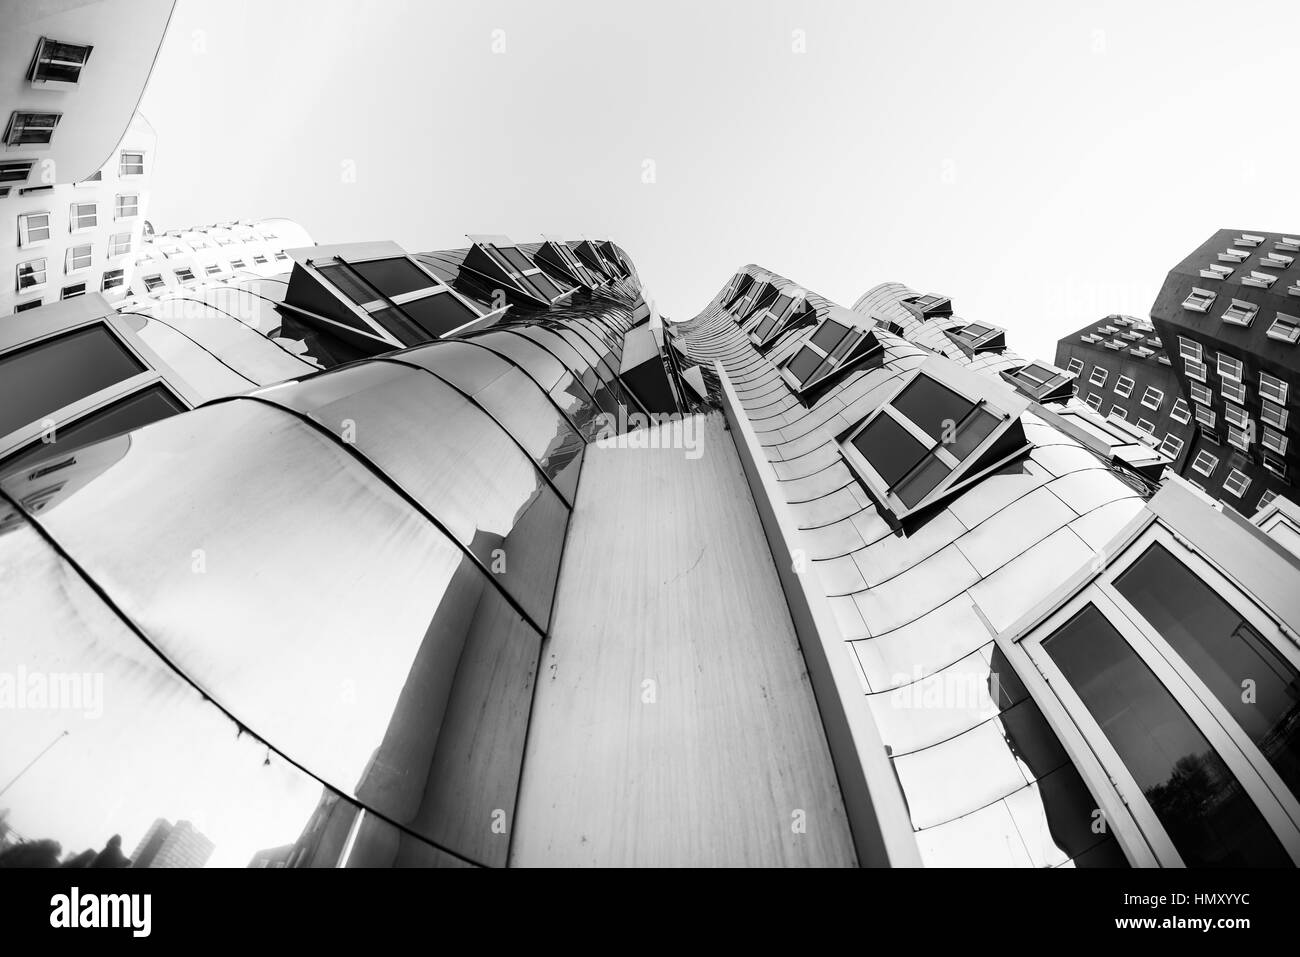 DUESSELDORF, GERMANY - JANUARY 22, 2017: The famous Chrome-Building in the New Media Harbor taken by a Fish Eye Camera in Black & White Stock Photo